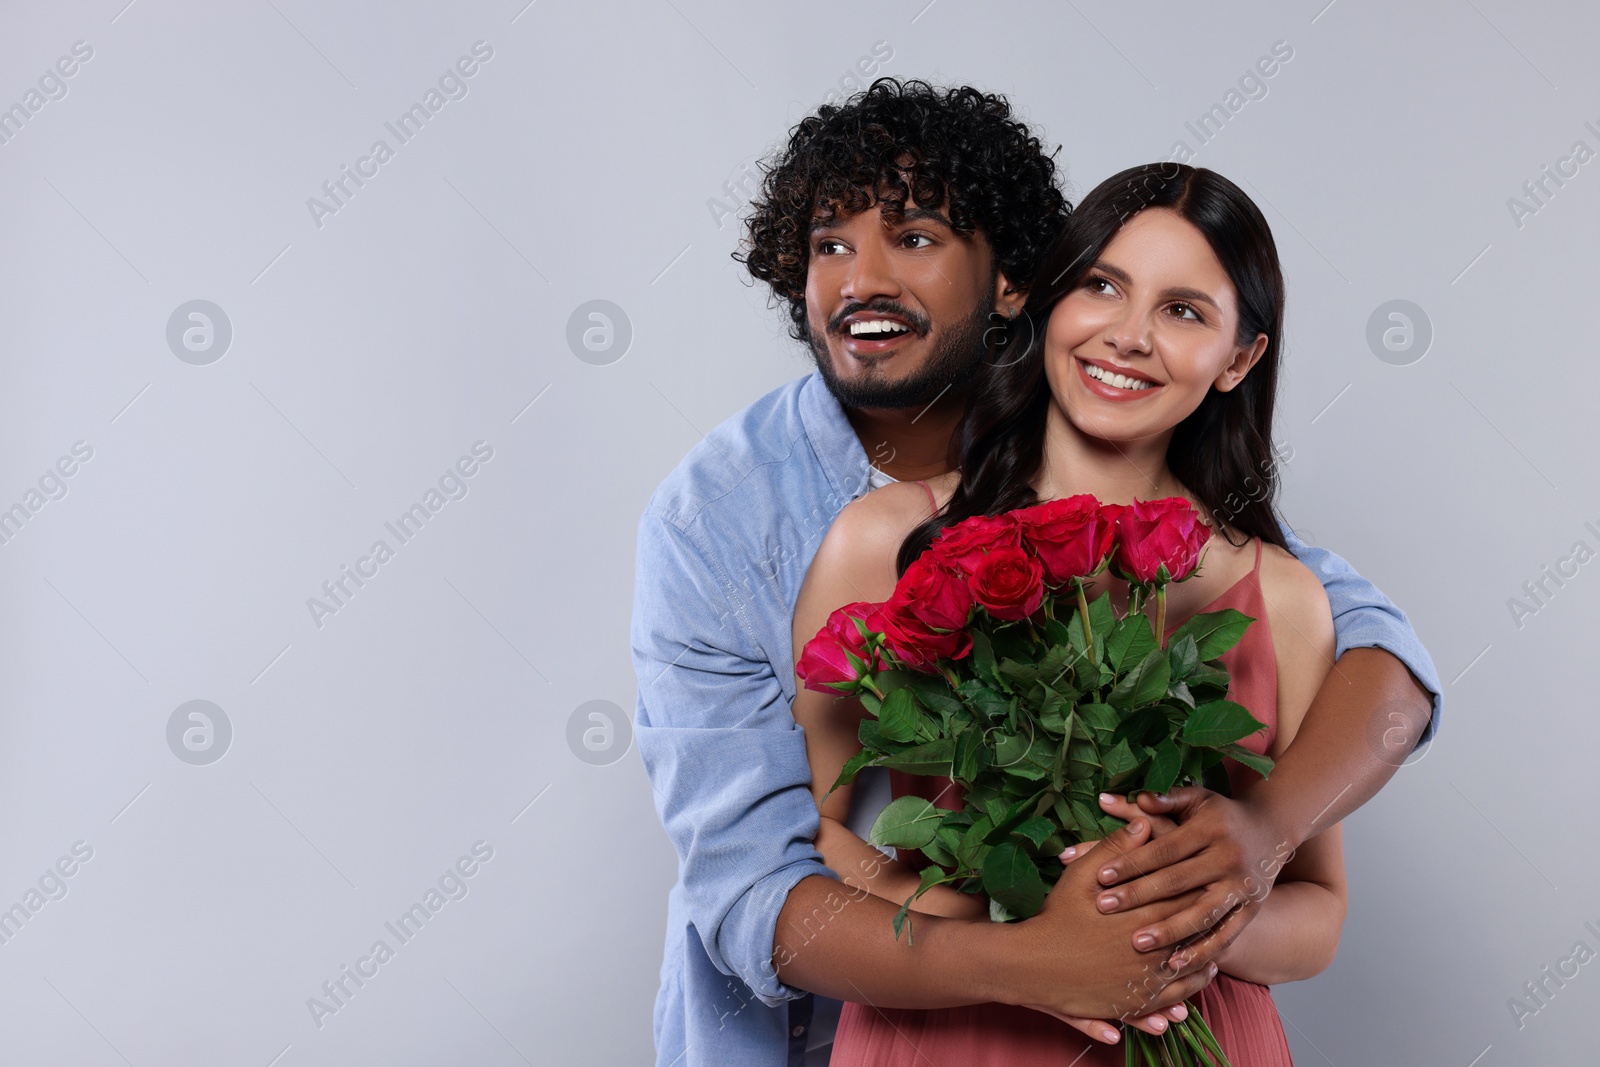 Photo of International dating. Happy couple with bouquet of roses on light grey background, space for text